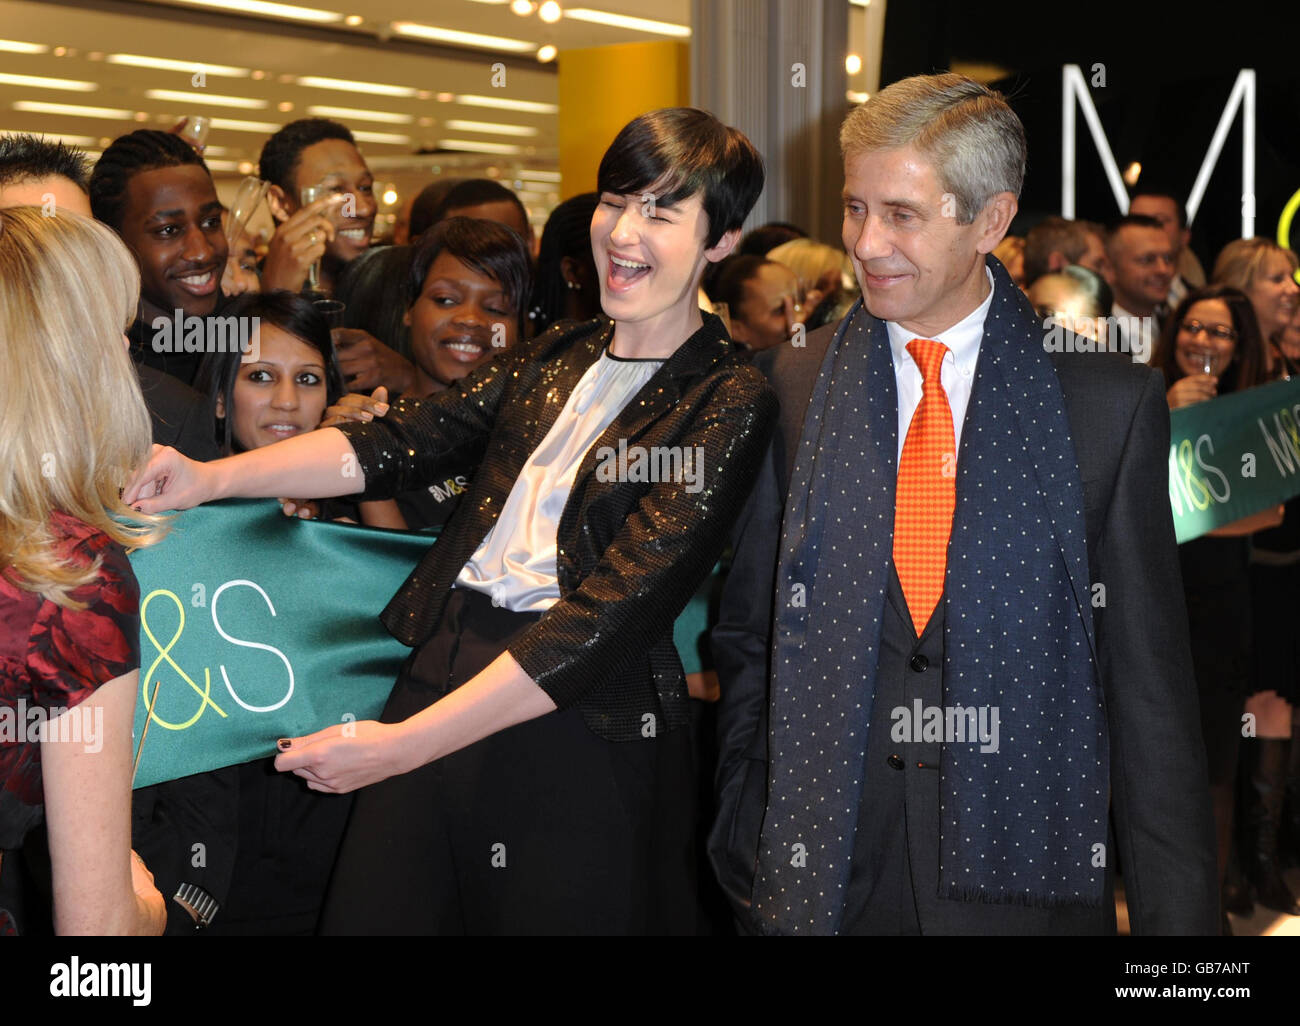 Stuart Rose of Marks and Spencer and Erin O'Connor offically unveil the Marks and Spencer store during the official opening of the Westfield Shopping Centre in White City, west London, on its opening day. Stock Photo